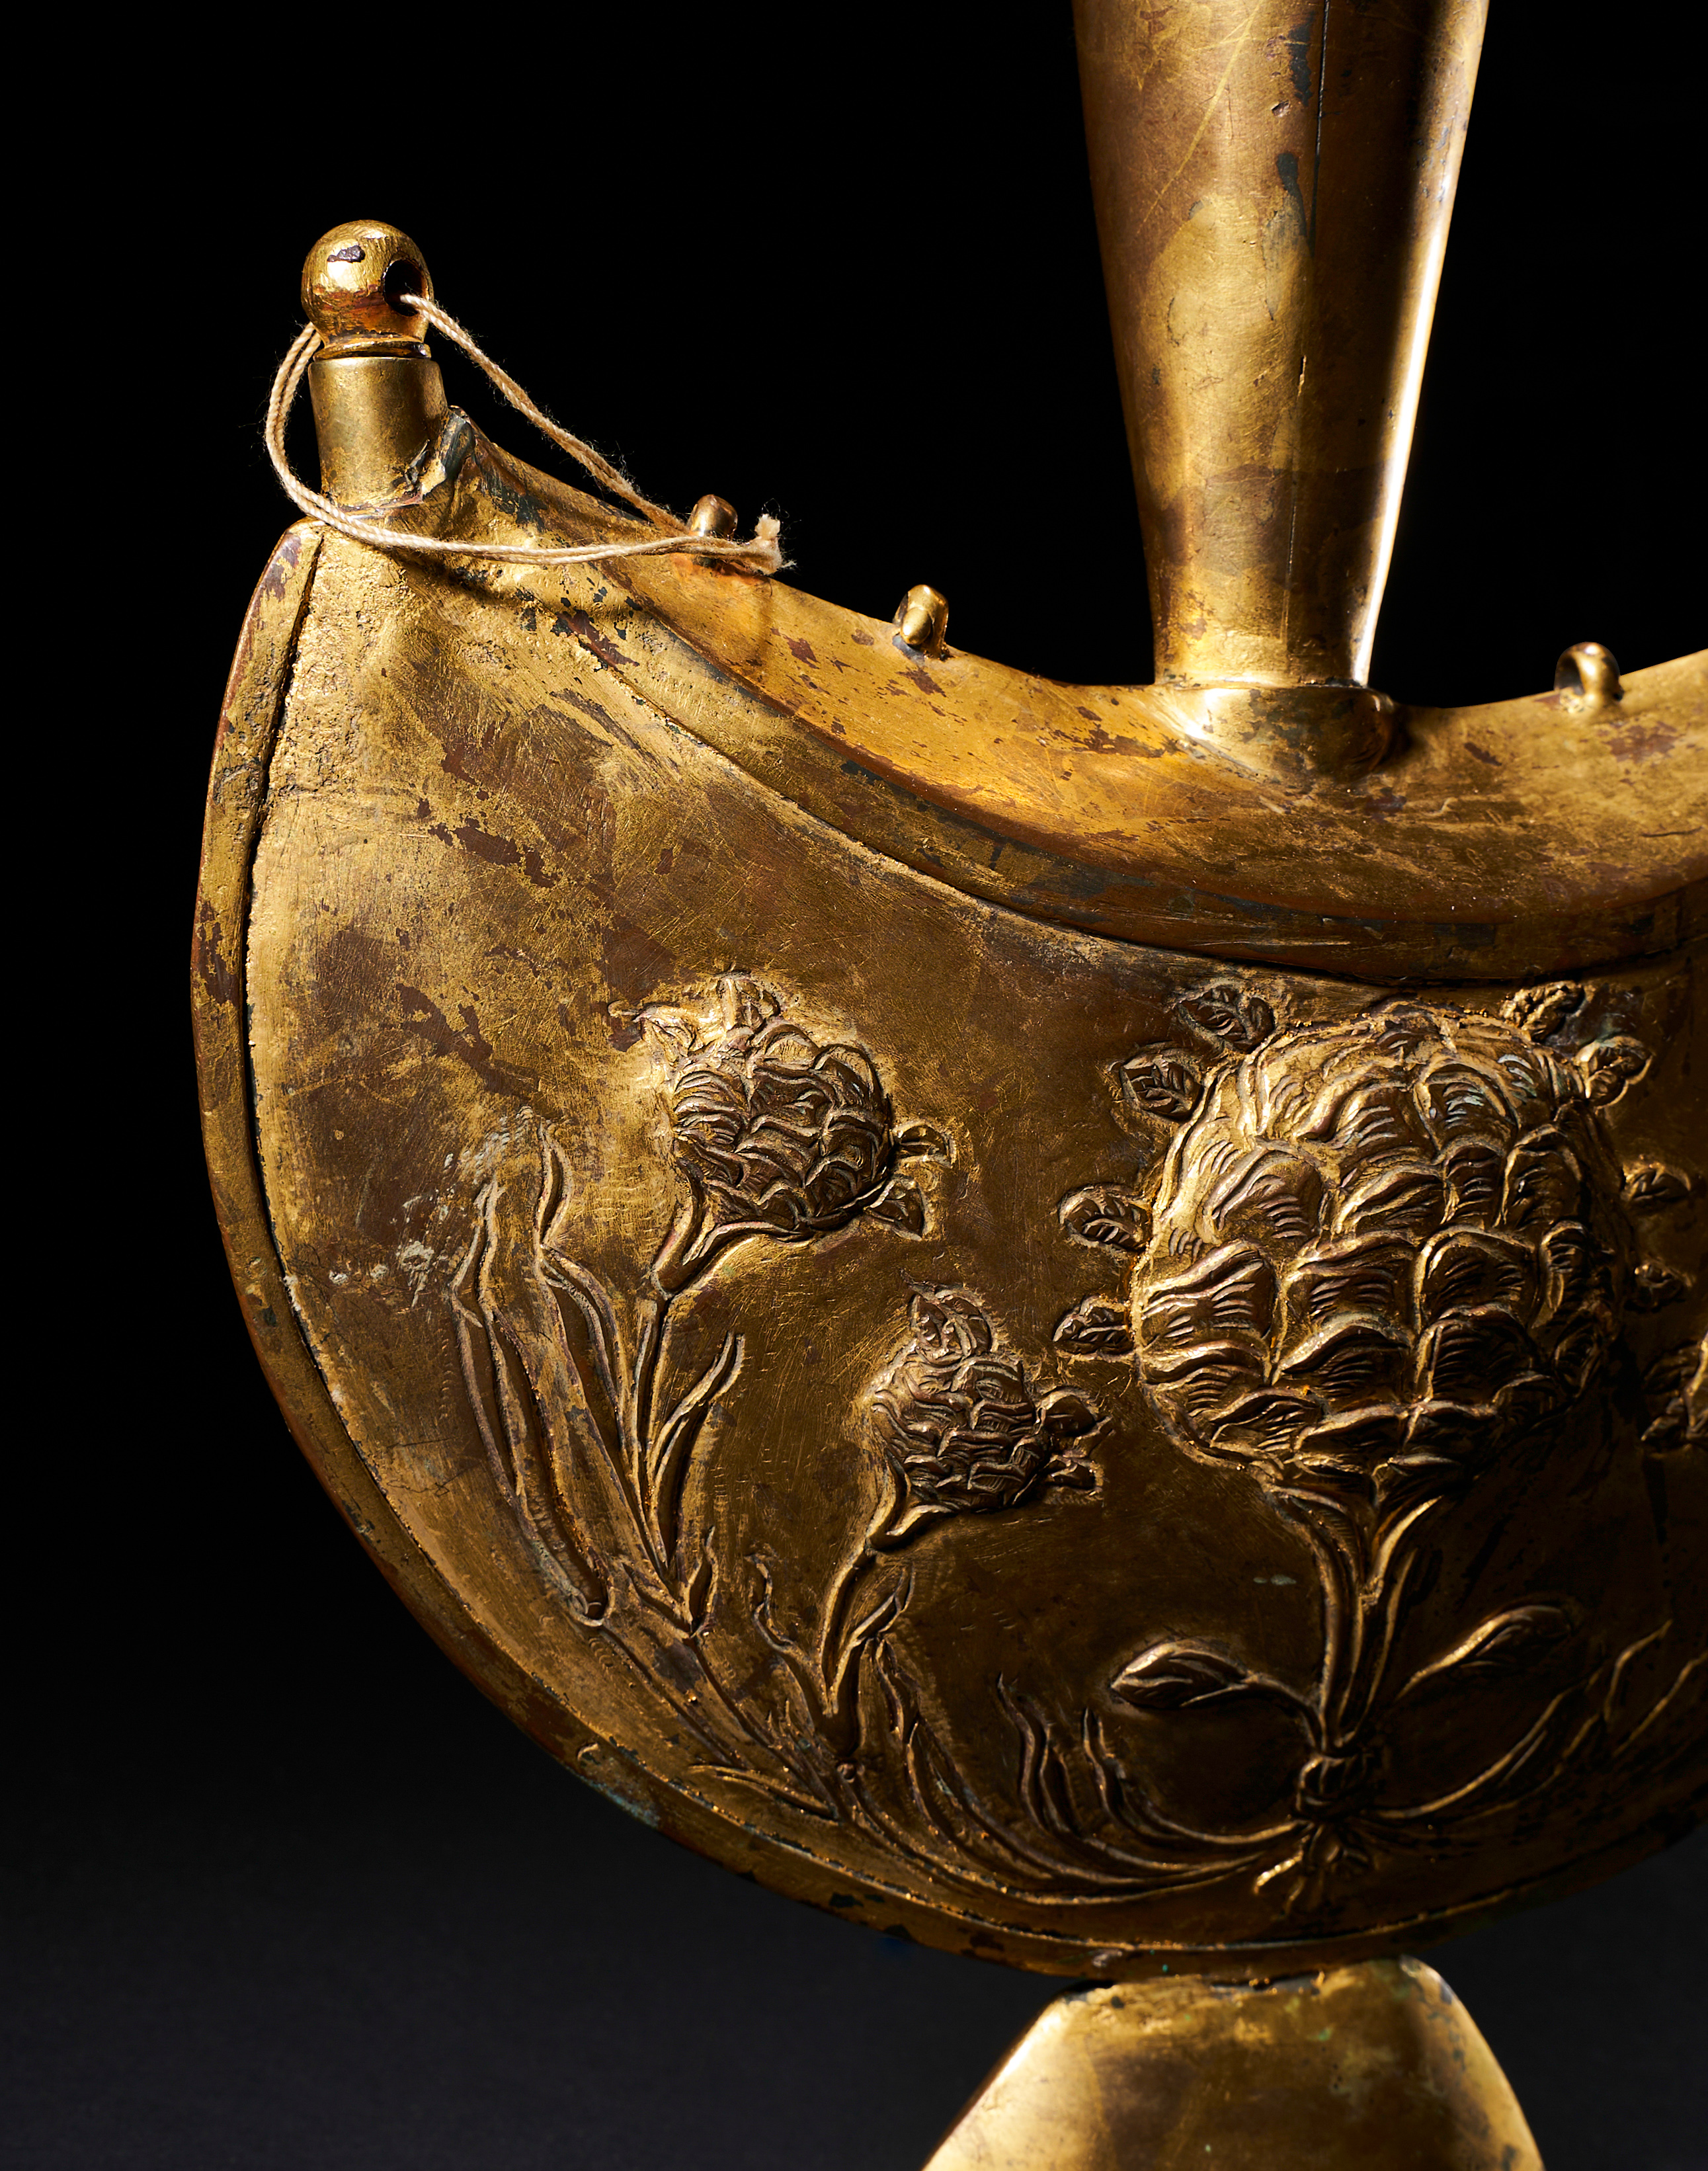 AN OTTOMAN OR MUGHAL COPPER GILT (TOMBAK) PILGRIM FLASK, 17TH CENTURY, DECCAN OR OTTOMAN - Image 2 of 3